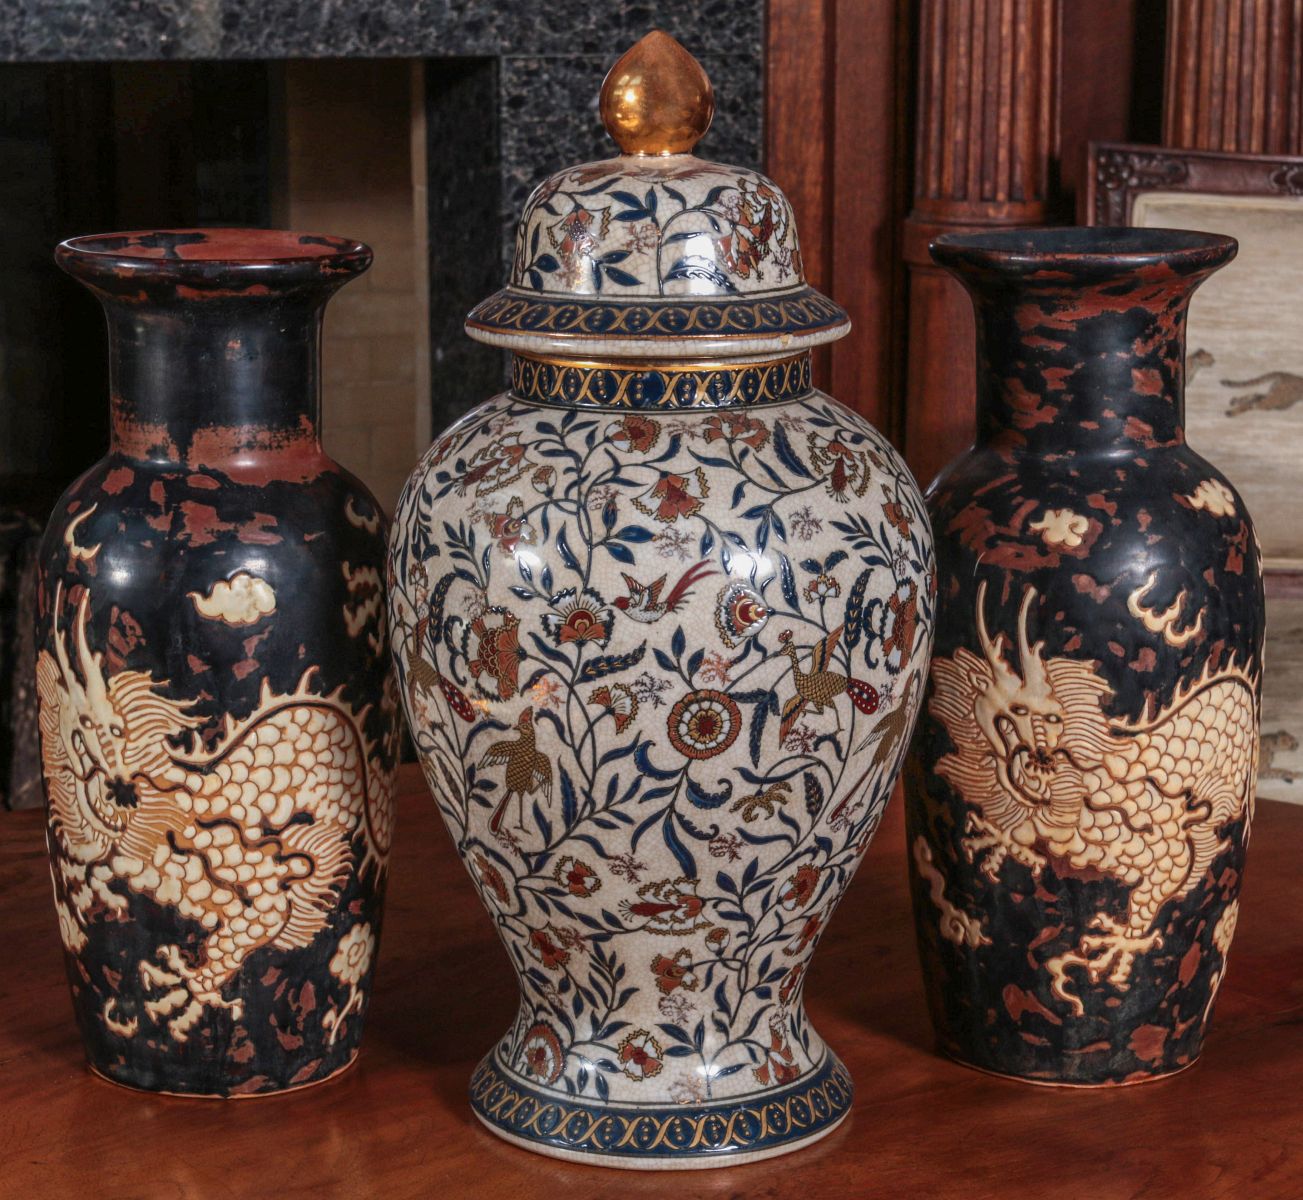 THREE CONTEMPORARY ASIAN STYLE PORCELAIN VASES